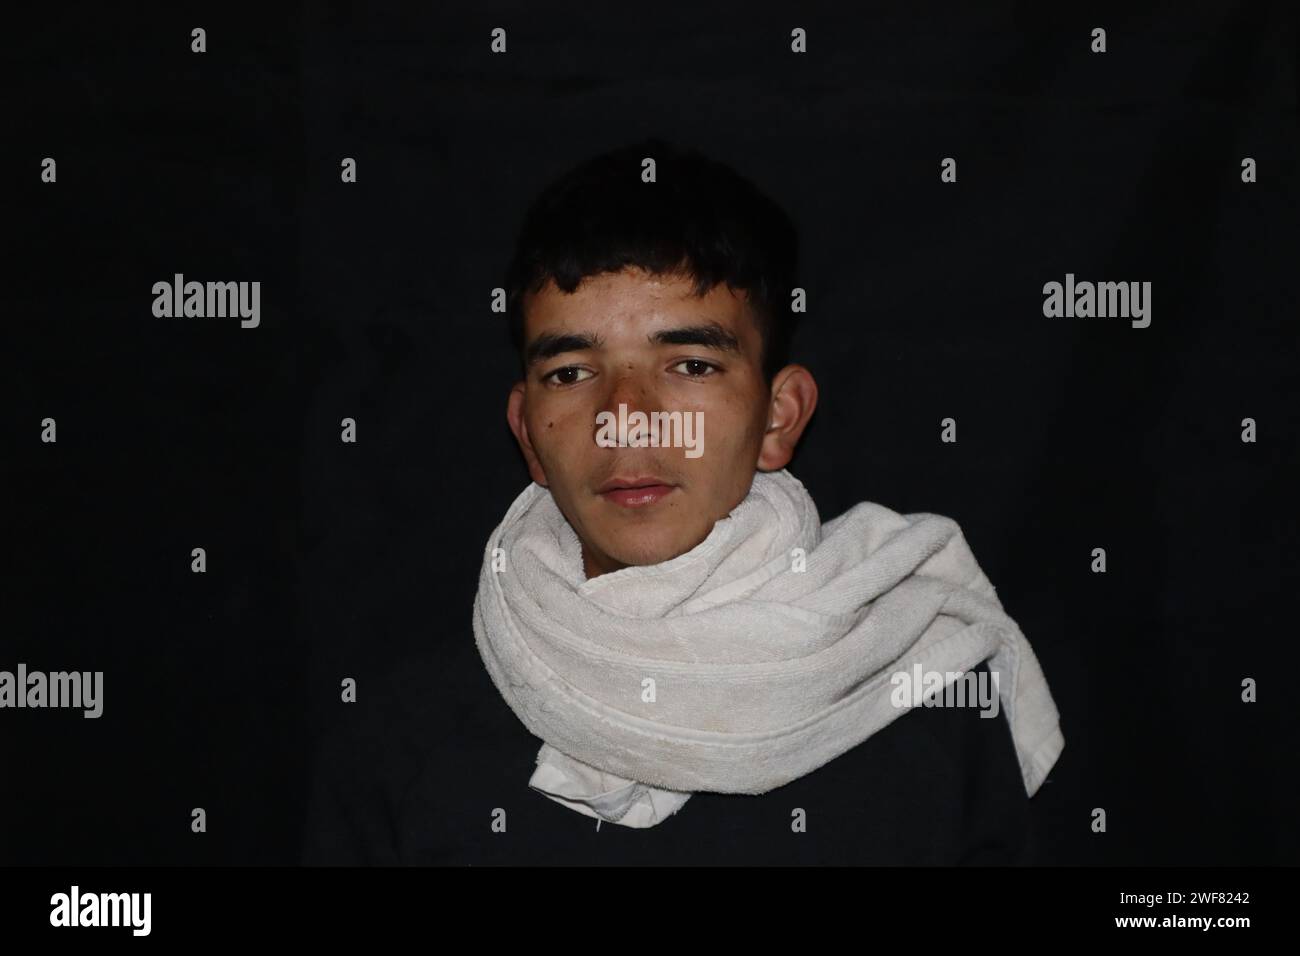 Picture of himalayan adult man with a black backround, Photo of handsome Himalayan boy taken in winter Stock Photo